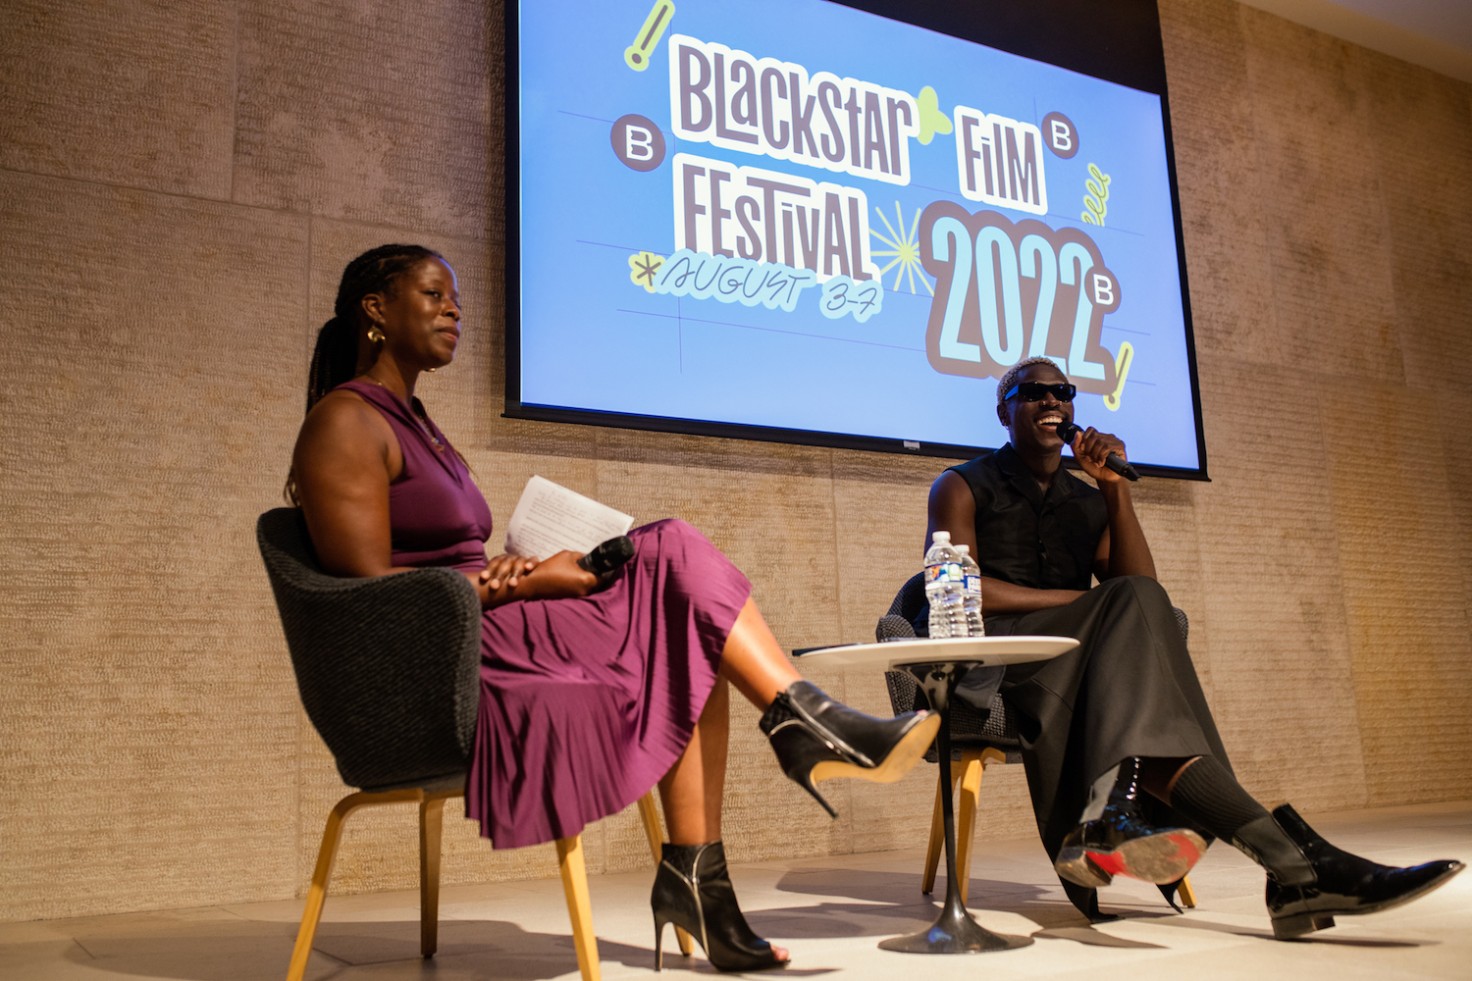 Moses Sumney and Iyabo Kwayana sit on stage in front of a screen with the BlackStar Film Festival flier.